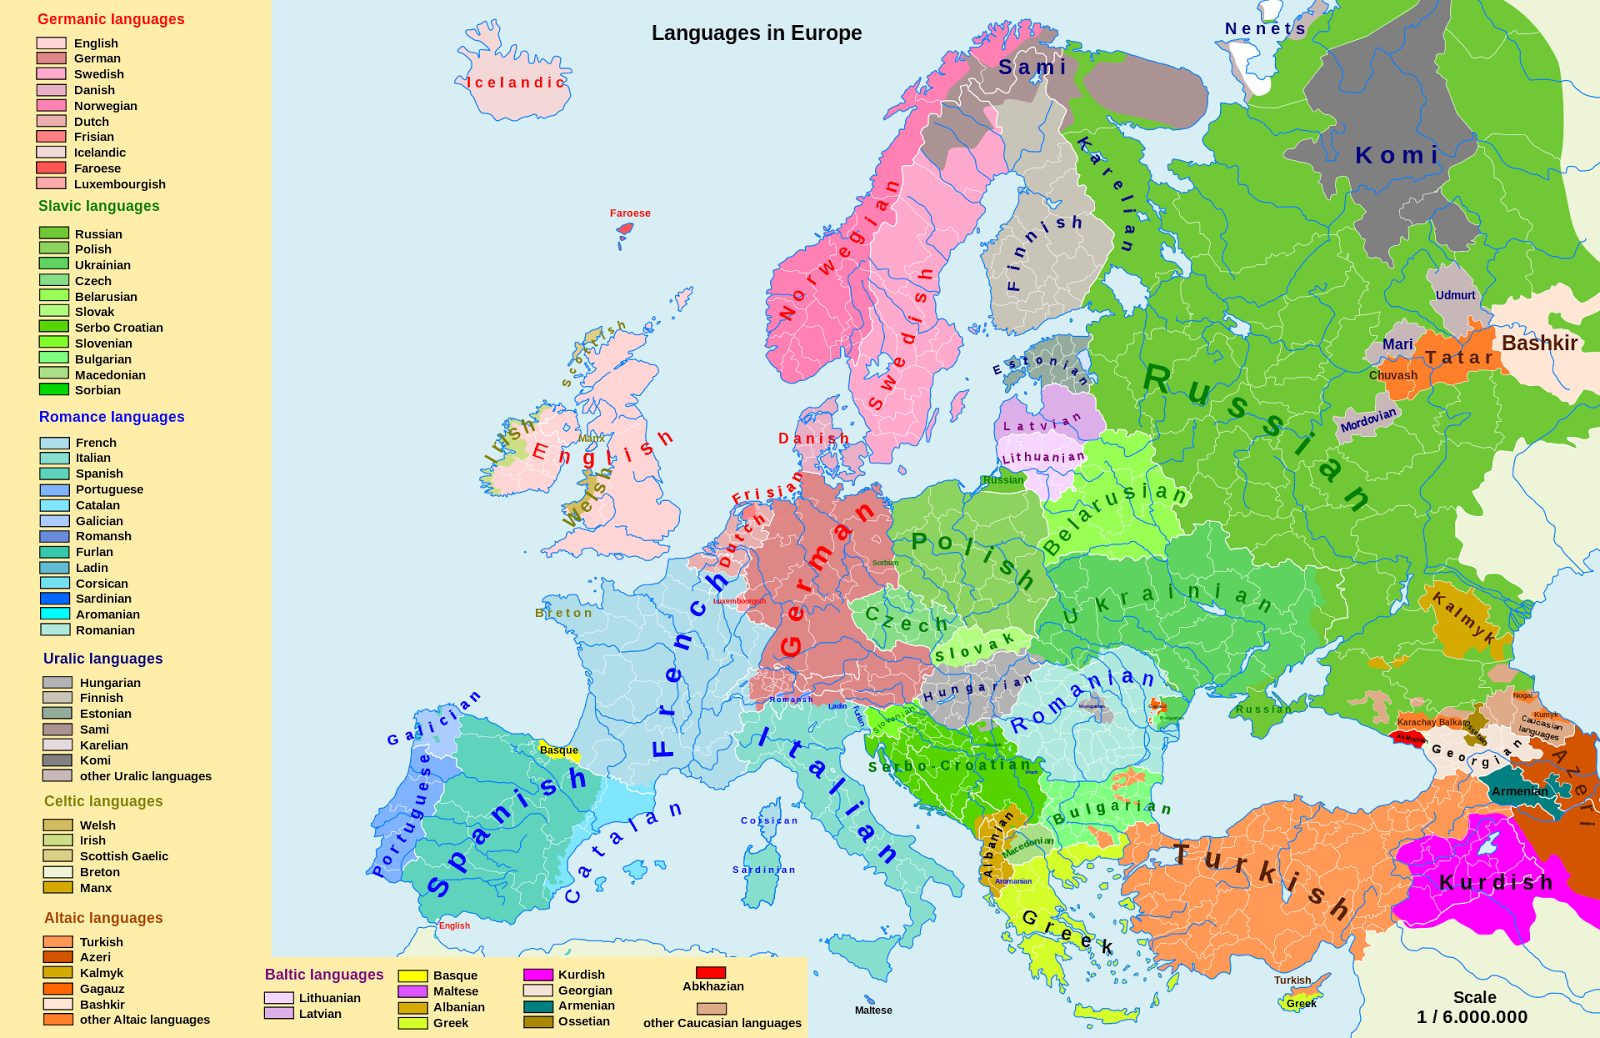 Languages of Central and Eastern Europe (CEE)